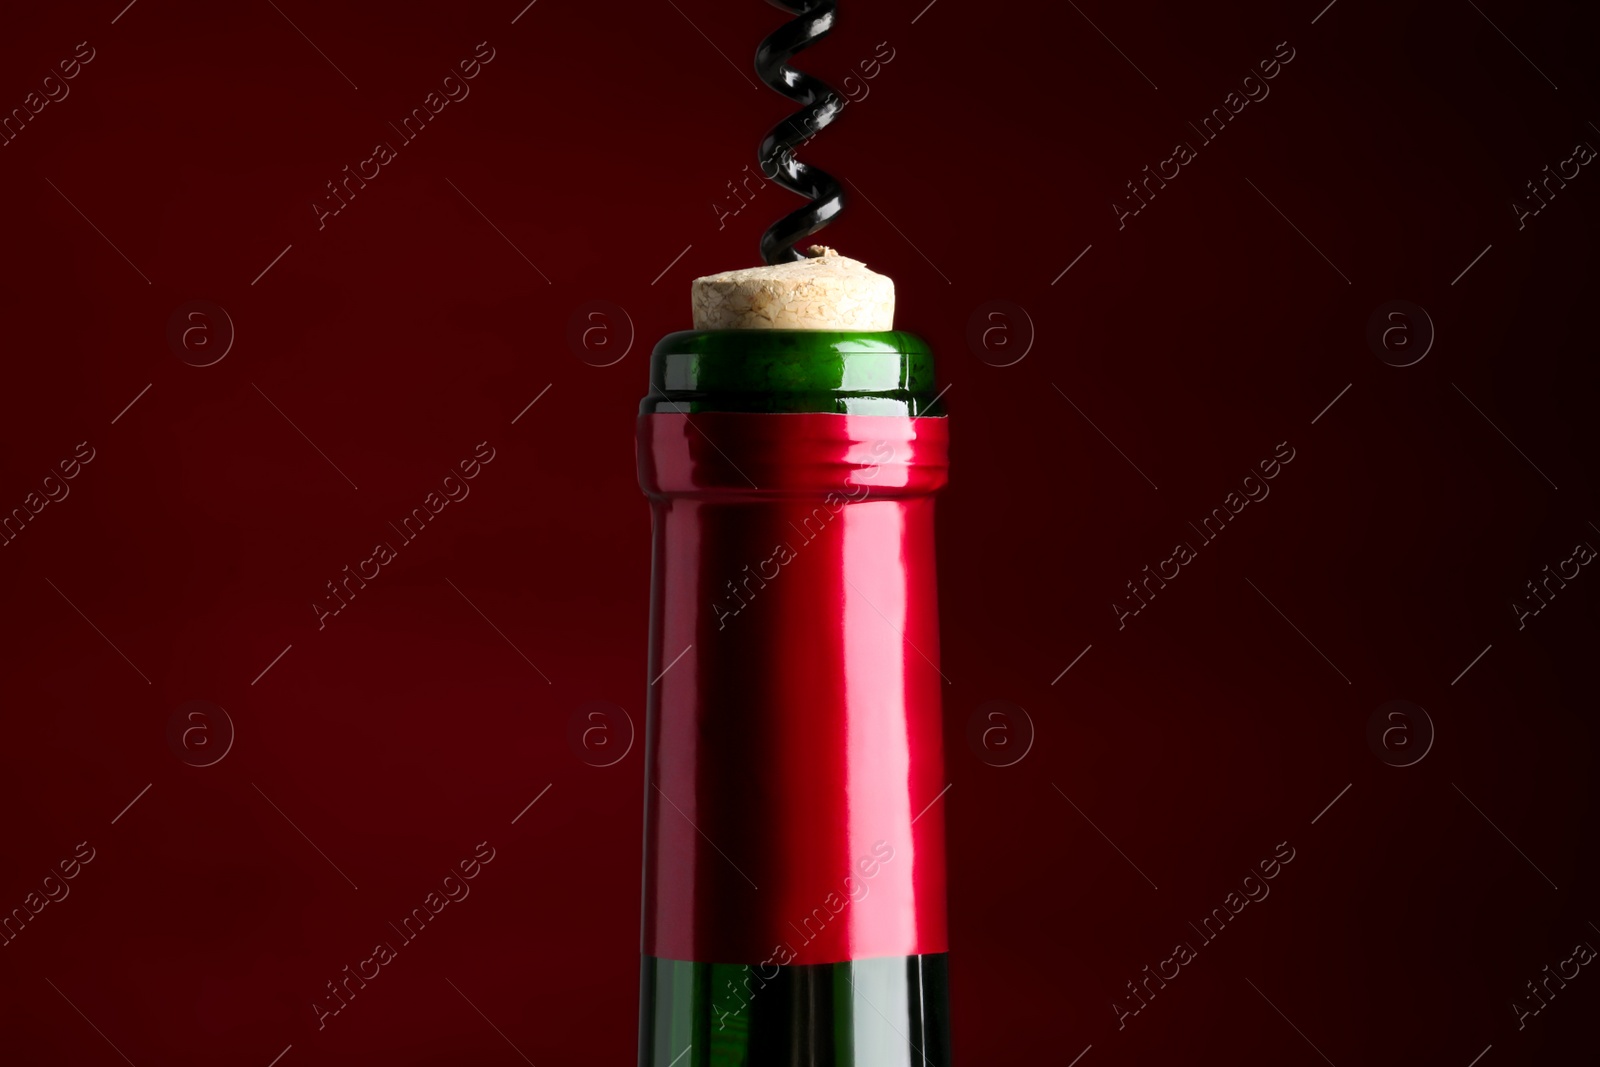 Photo of Opening bottle of wine with corkscrew on burgundy background